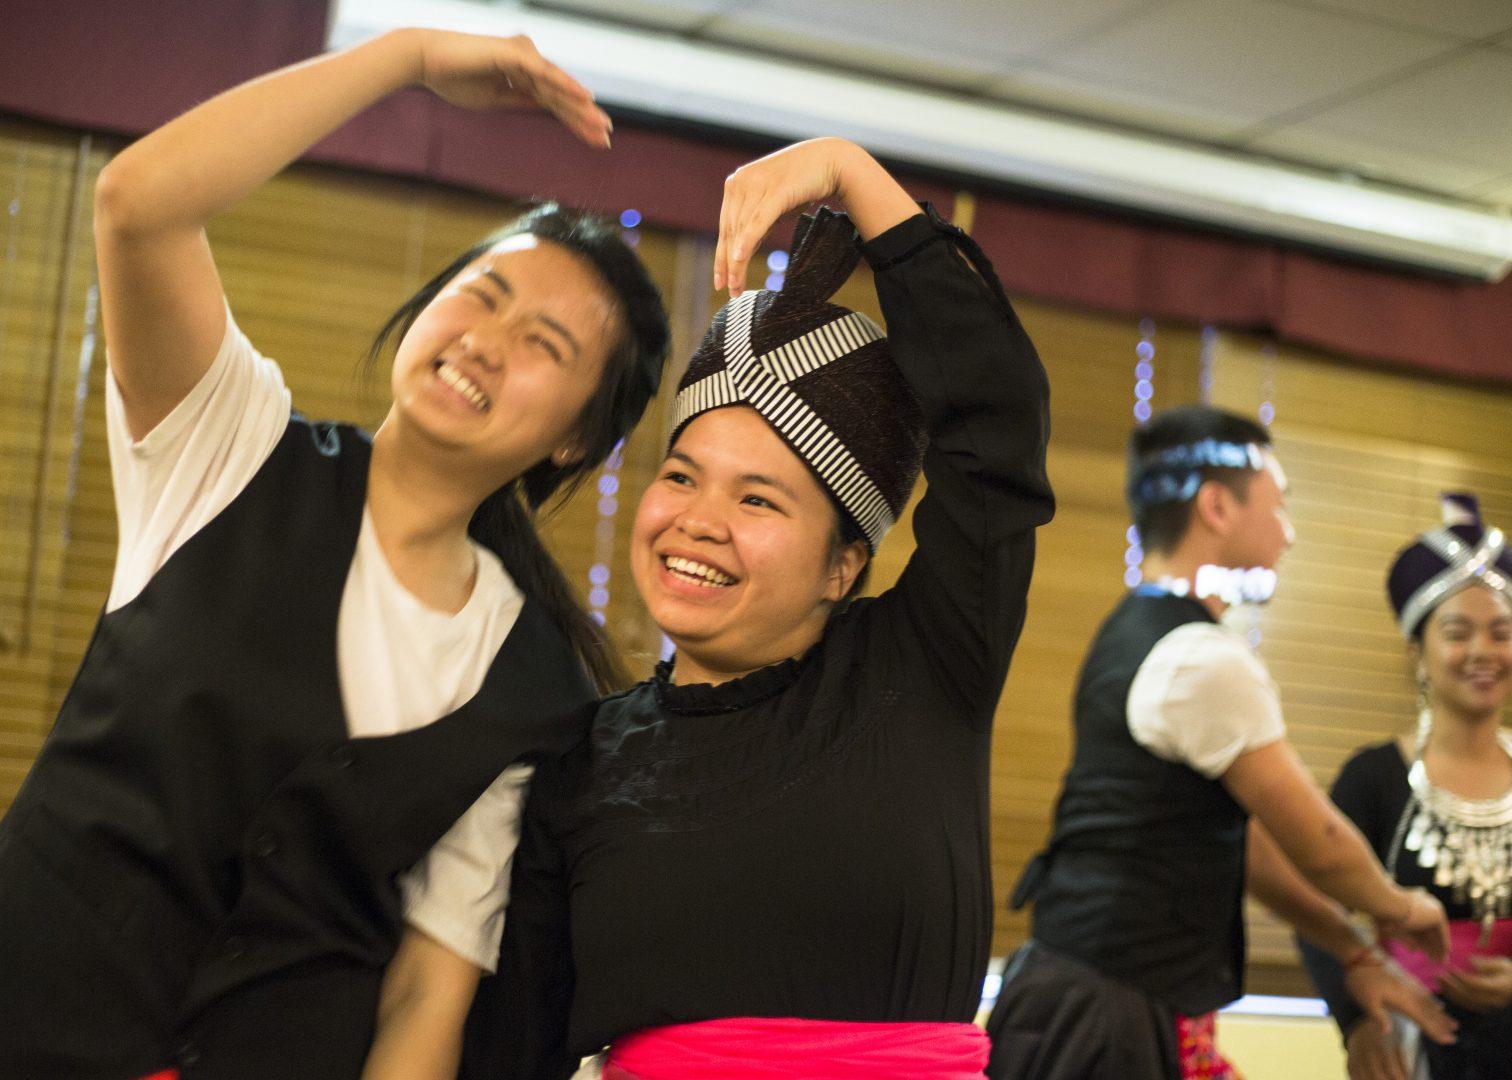 Hmong Student Association members Pazao Lor and Sandy Vang perform their dance during the Amererasia Culture Show in the Vintage Room on April 5, 2018. (Ramuel Reyes/The Collegian)